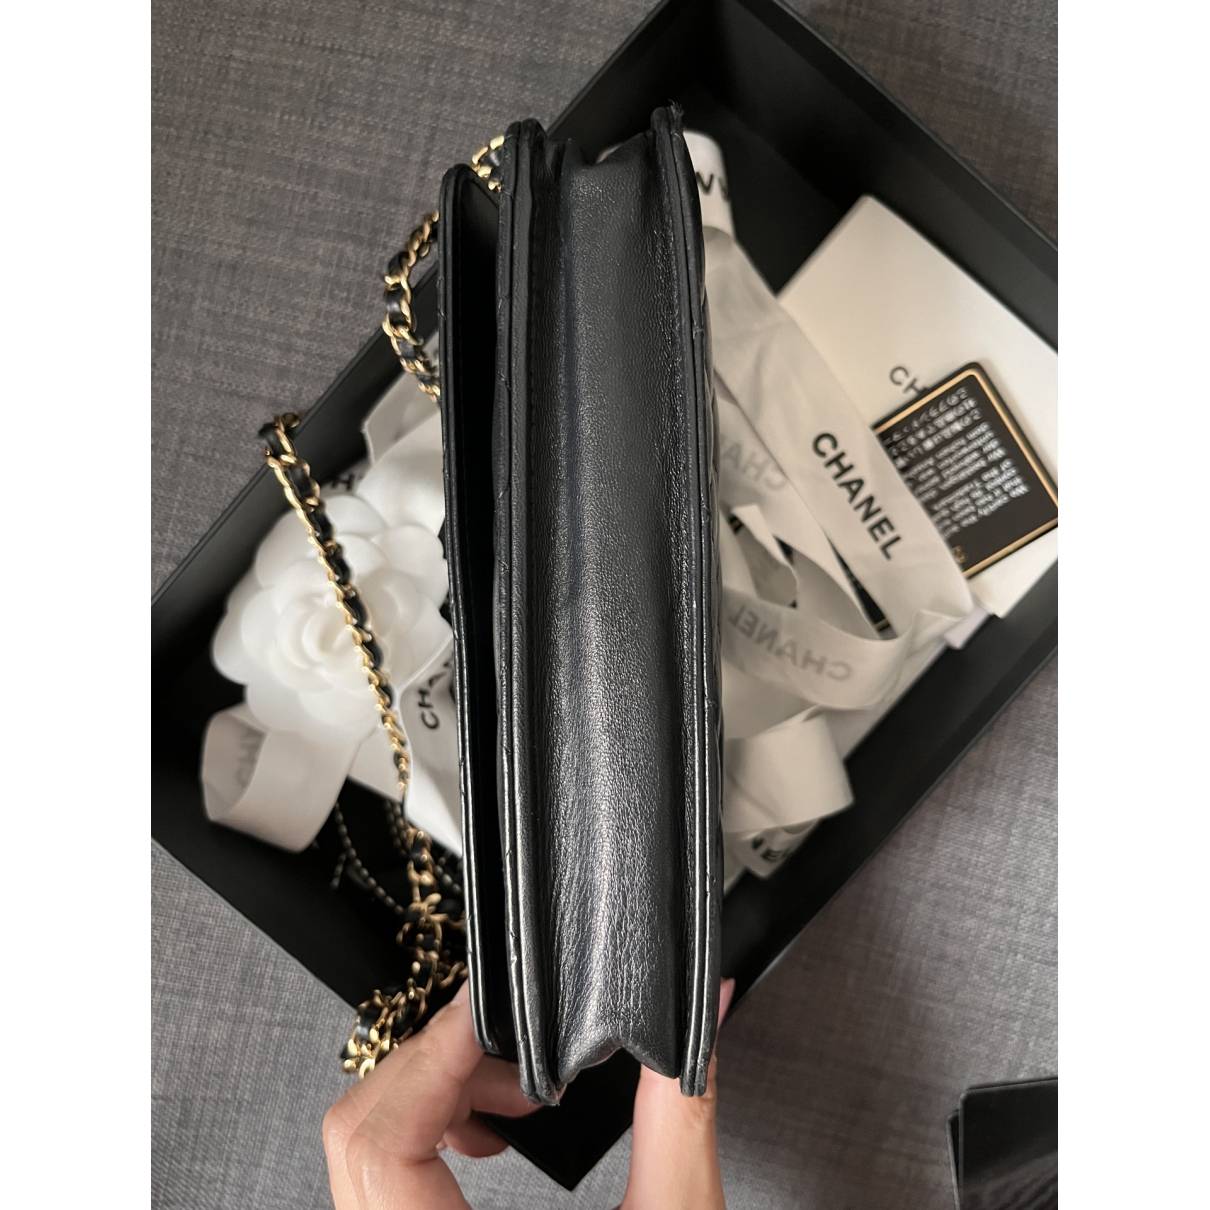 chanel woc patent leather